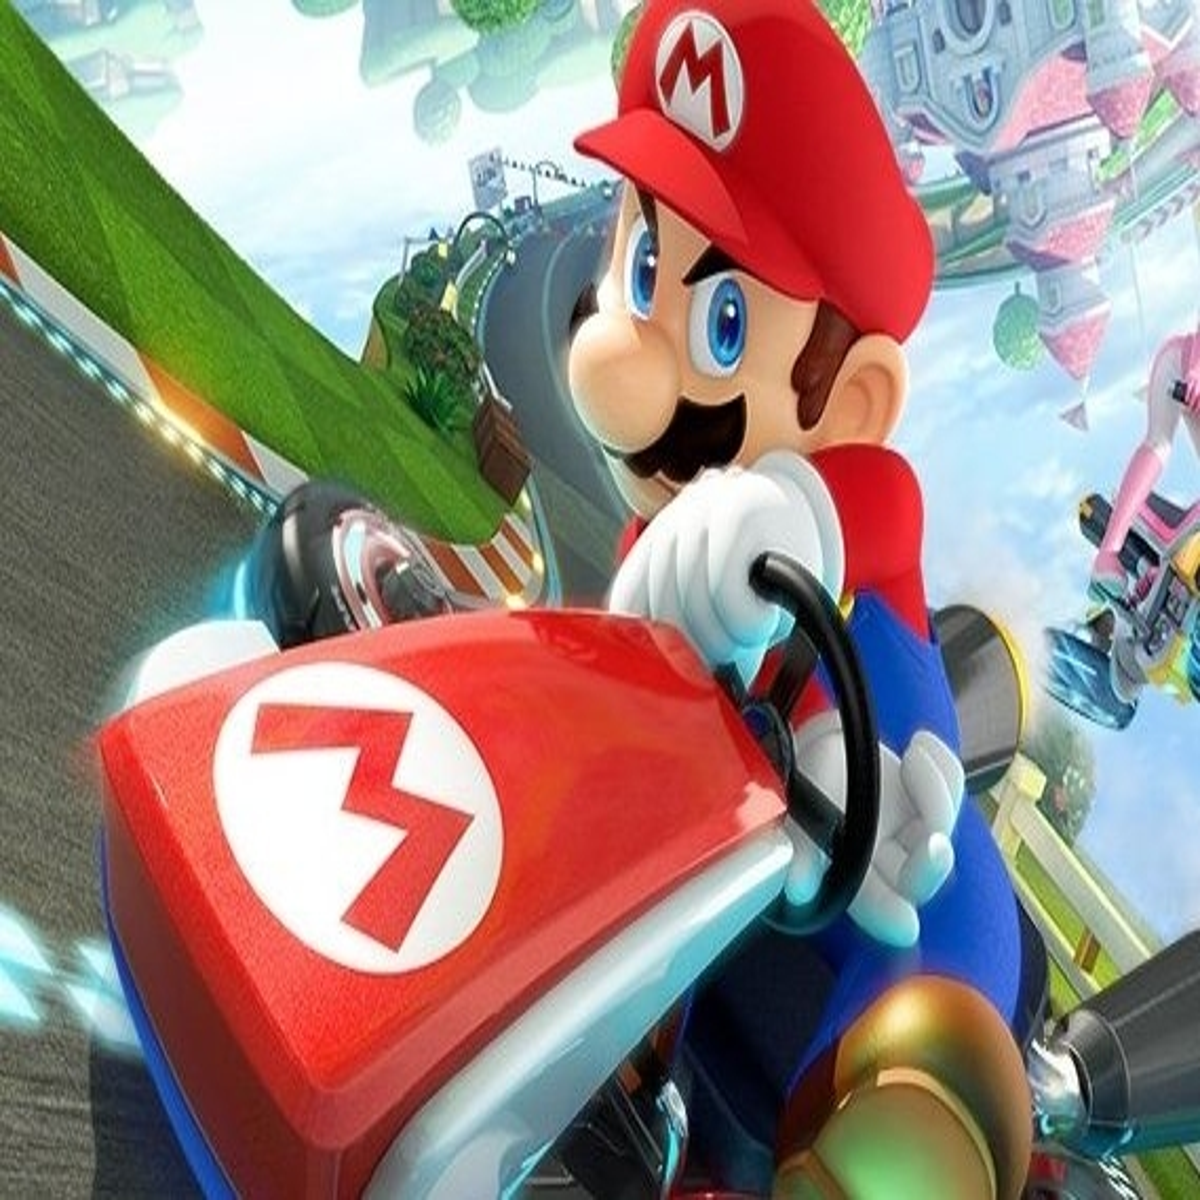 Switch Version Changes - Mario Kart 8 Guide - IGN